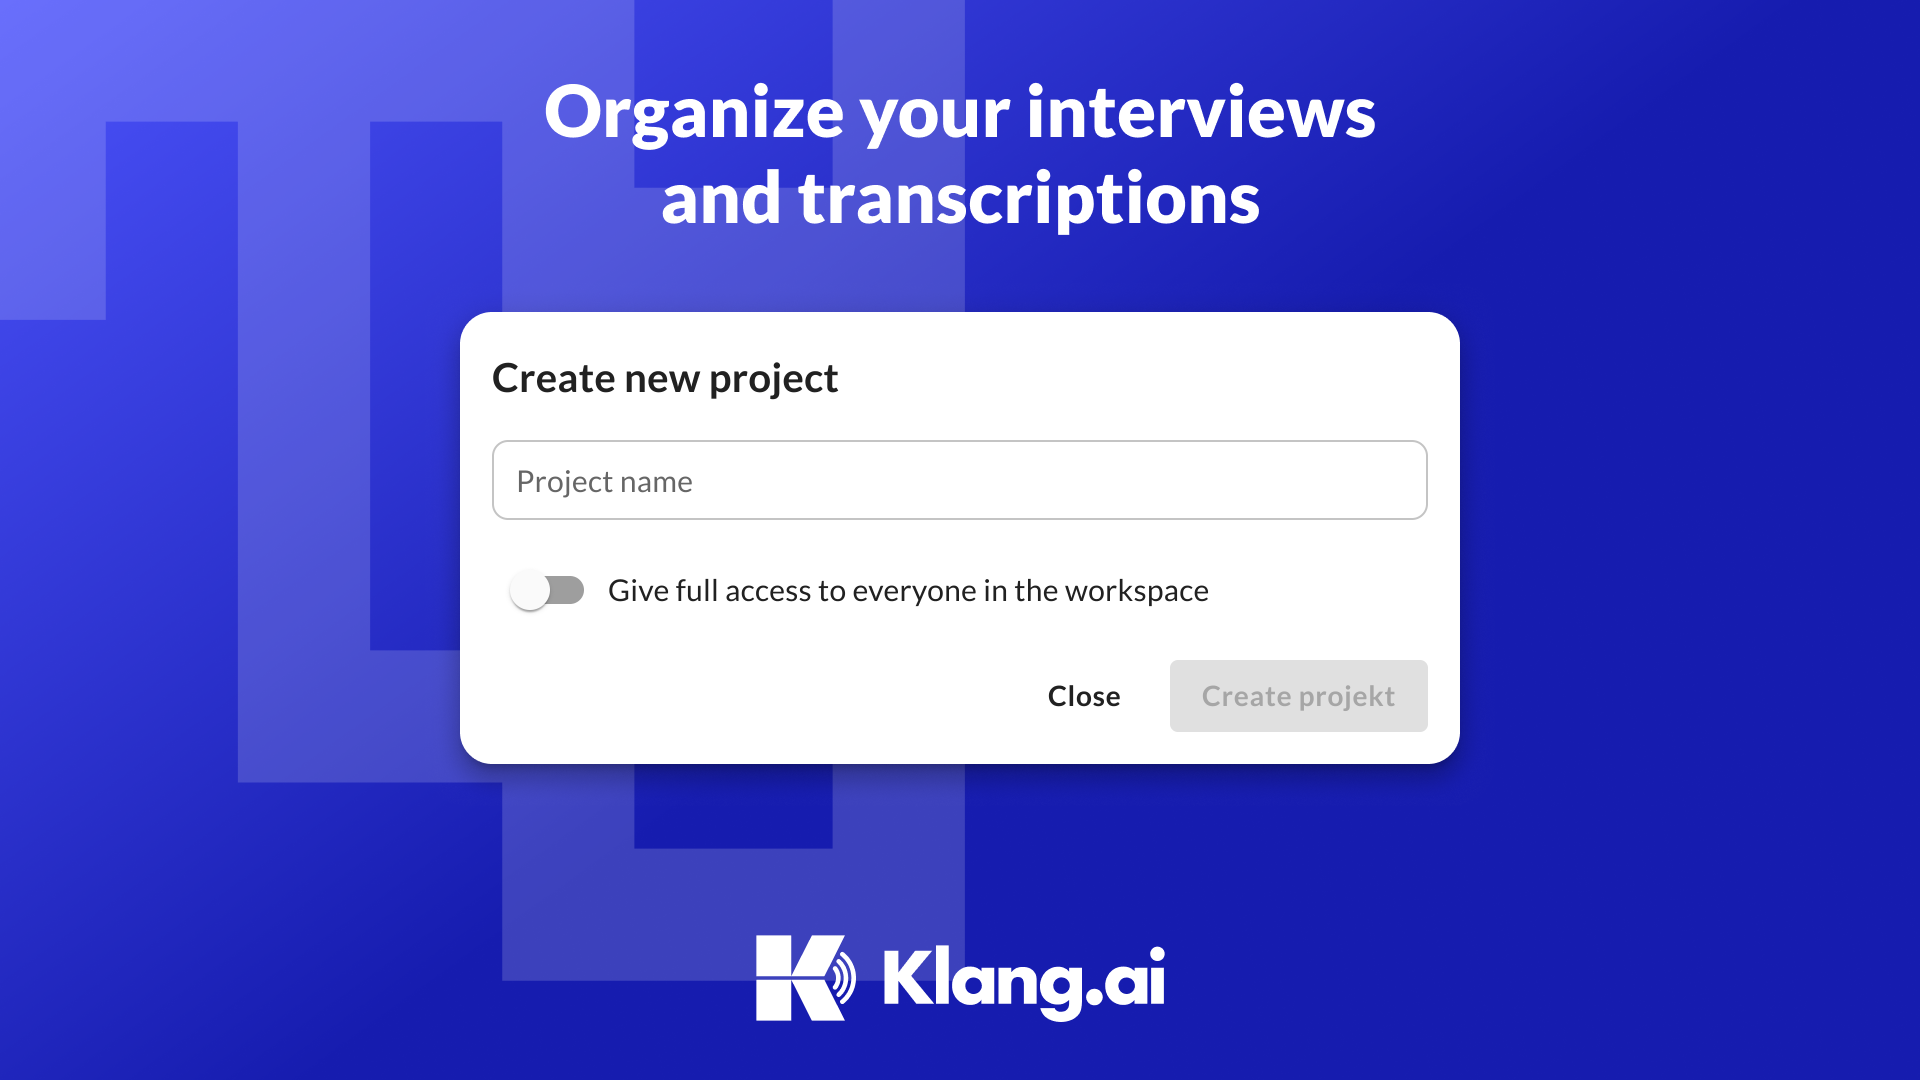 Organize your interviews and transcriptions